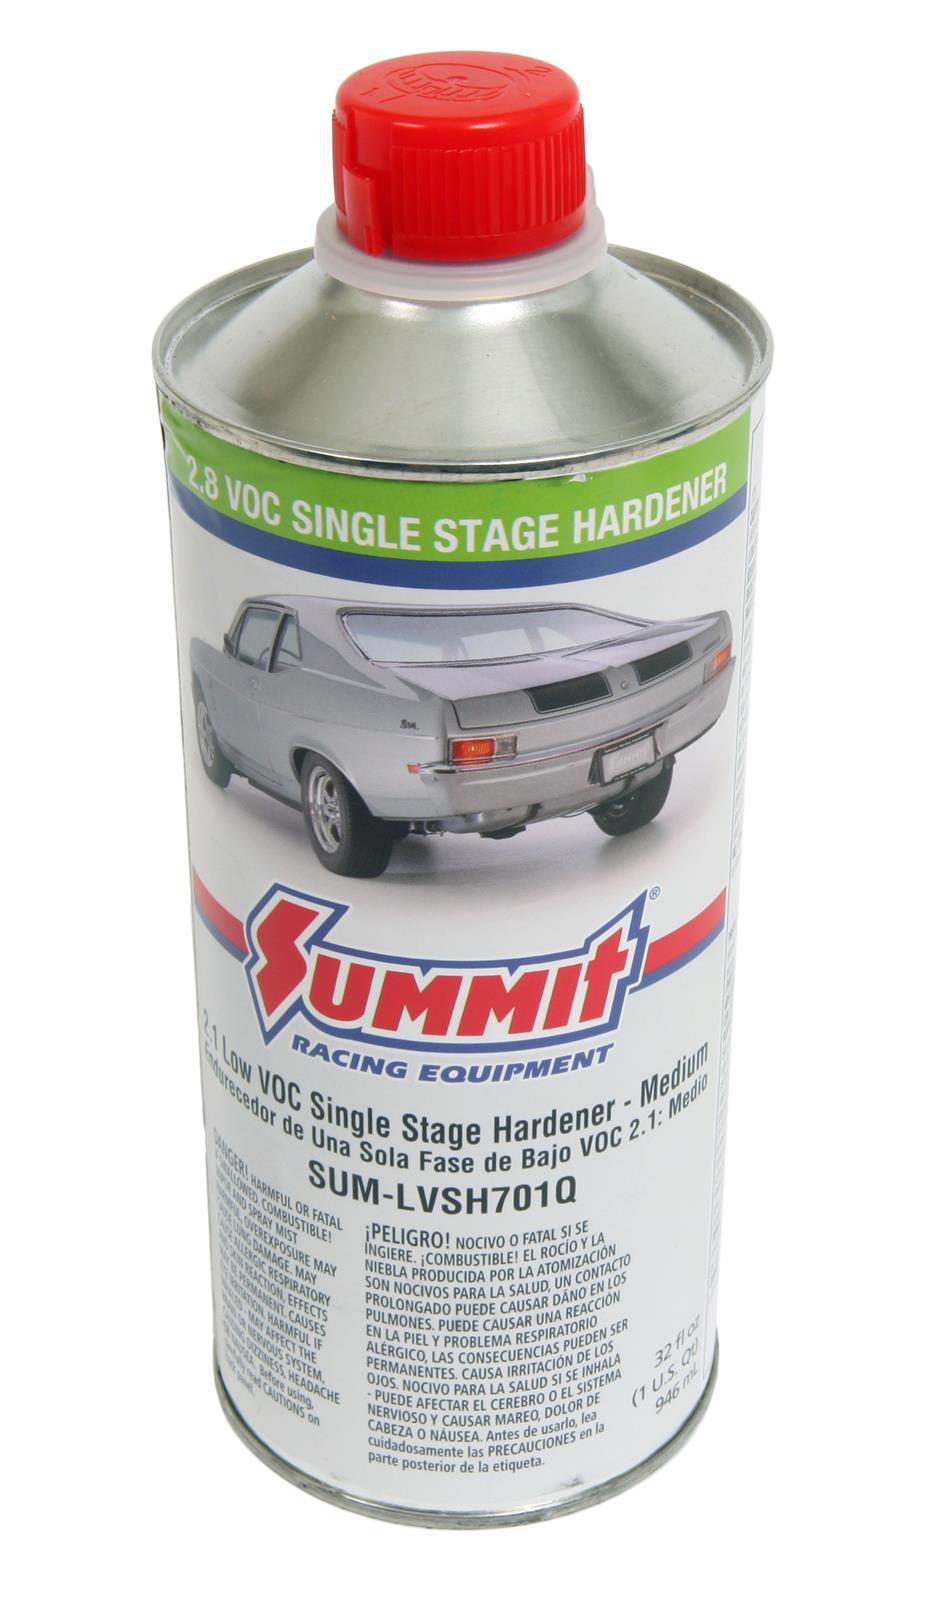 Summit Racing SUM-UP200G Summit Racing™ High-Solids 2K Urethane Clearcoat